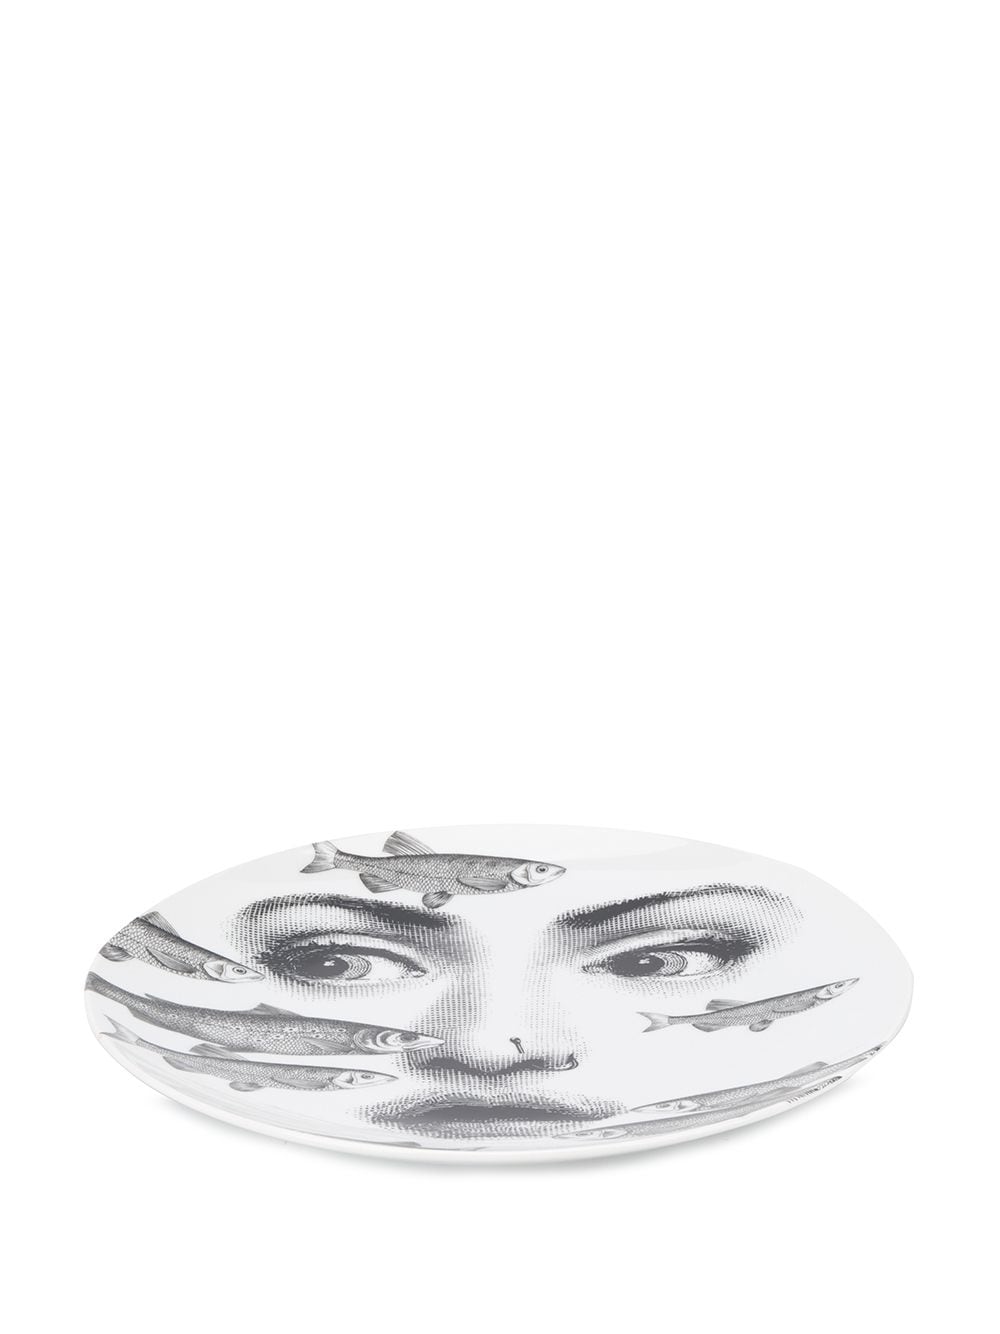 Fornasetti Home Accessories − Browse 400+ Items now at $122.00+